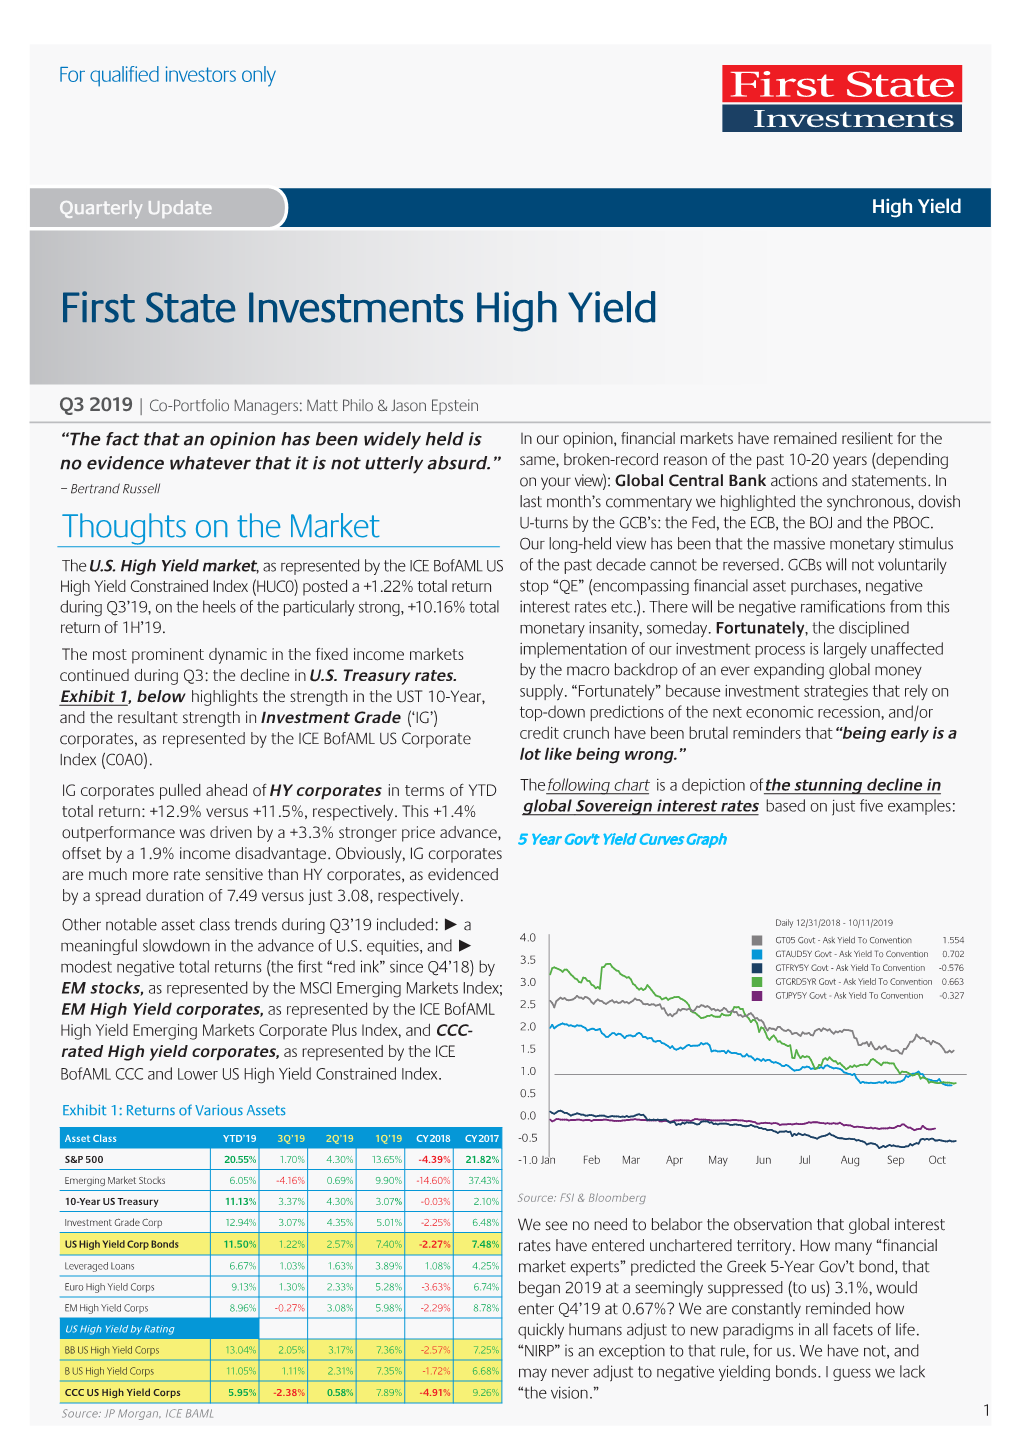 First State Investments High Yield